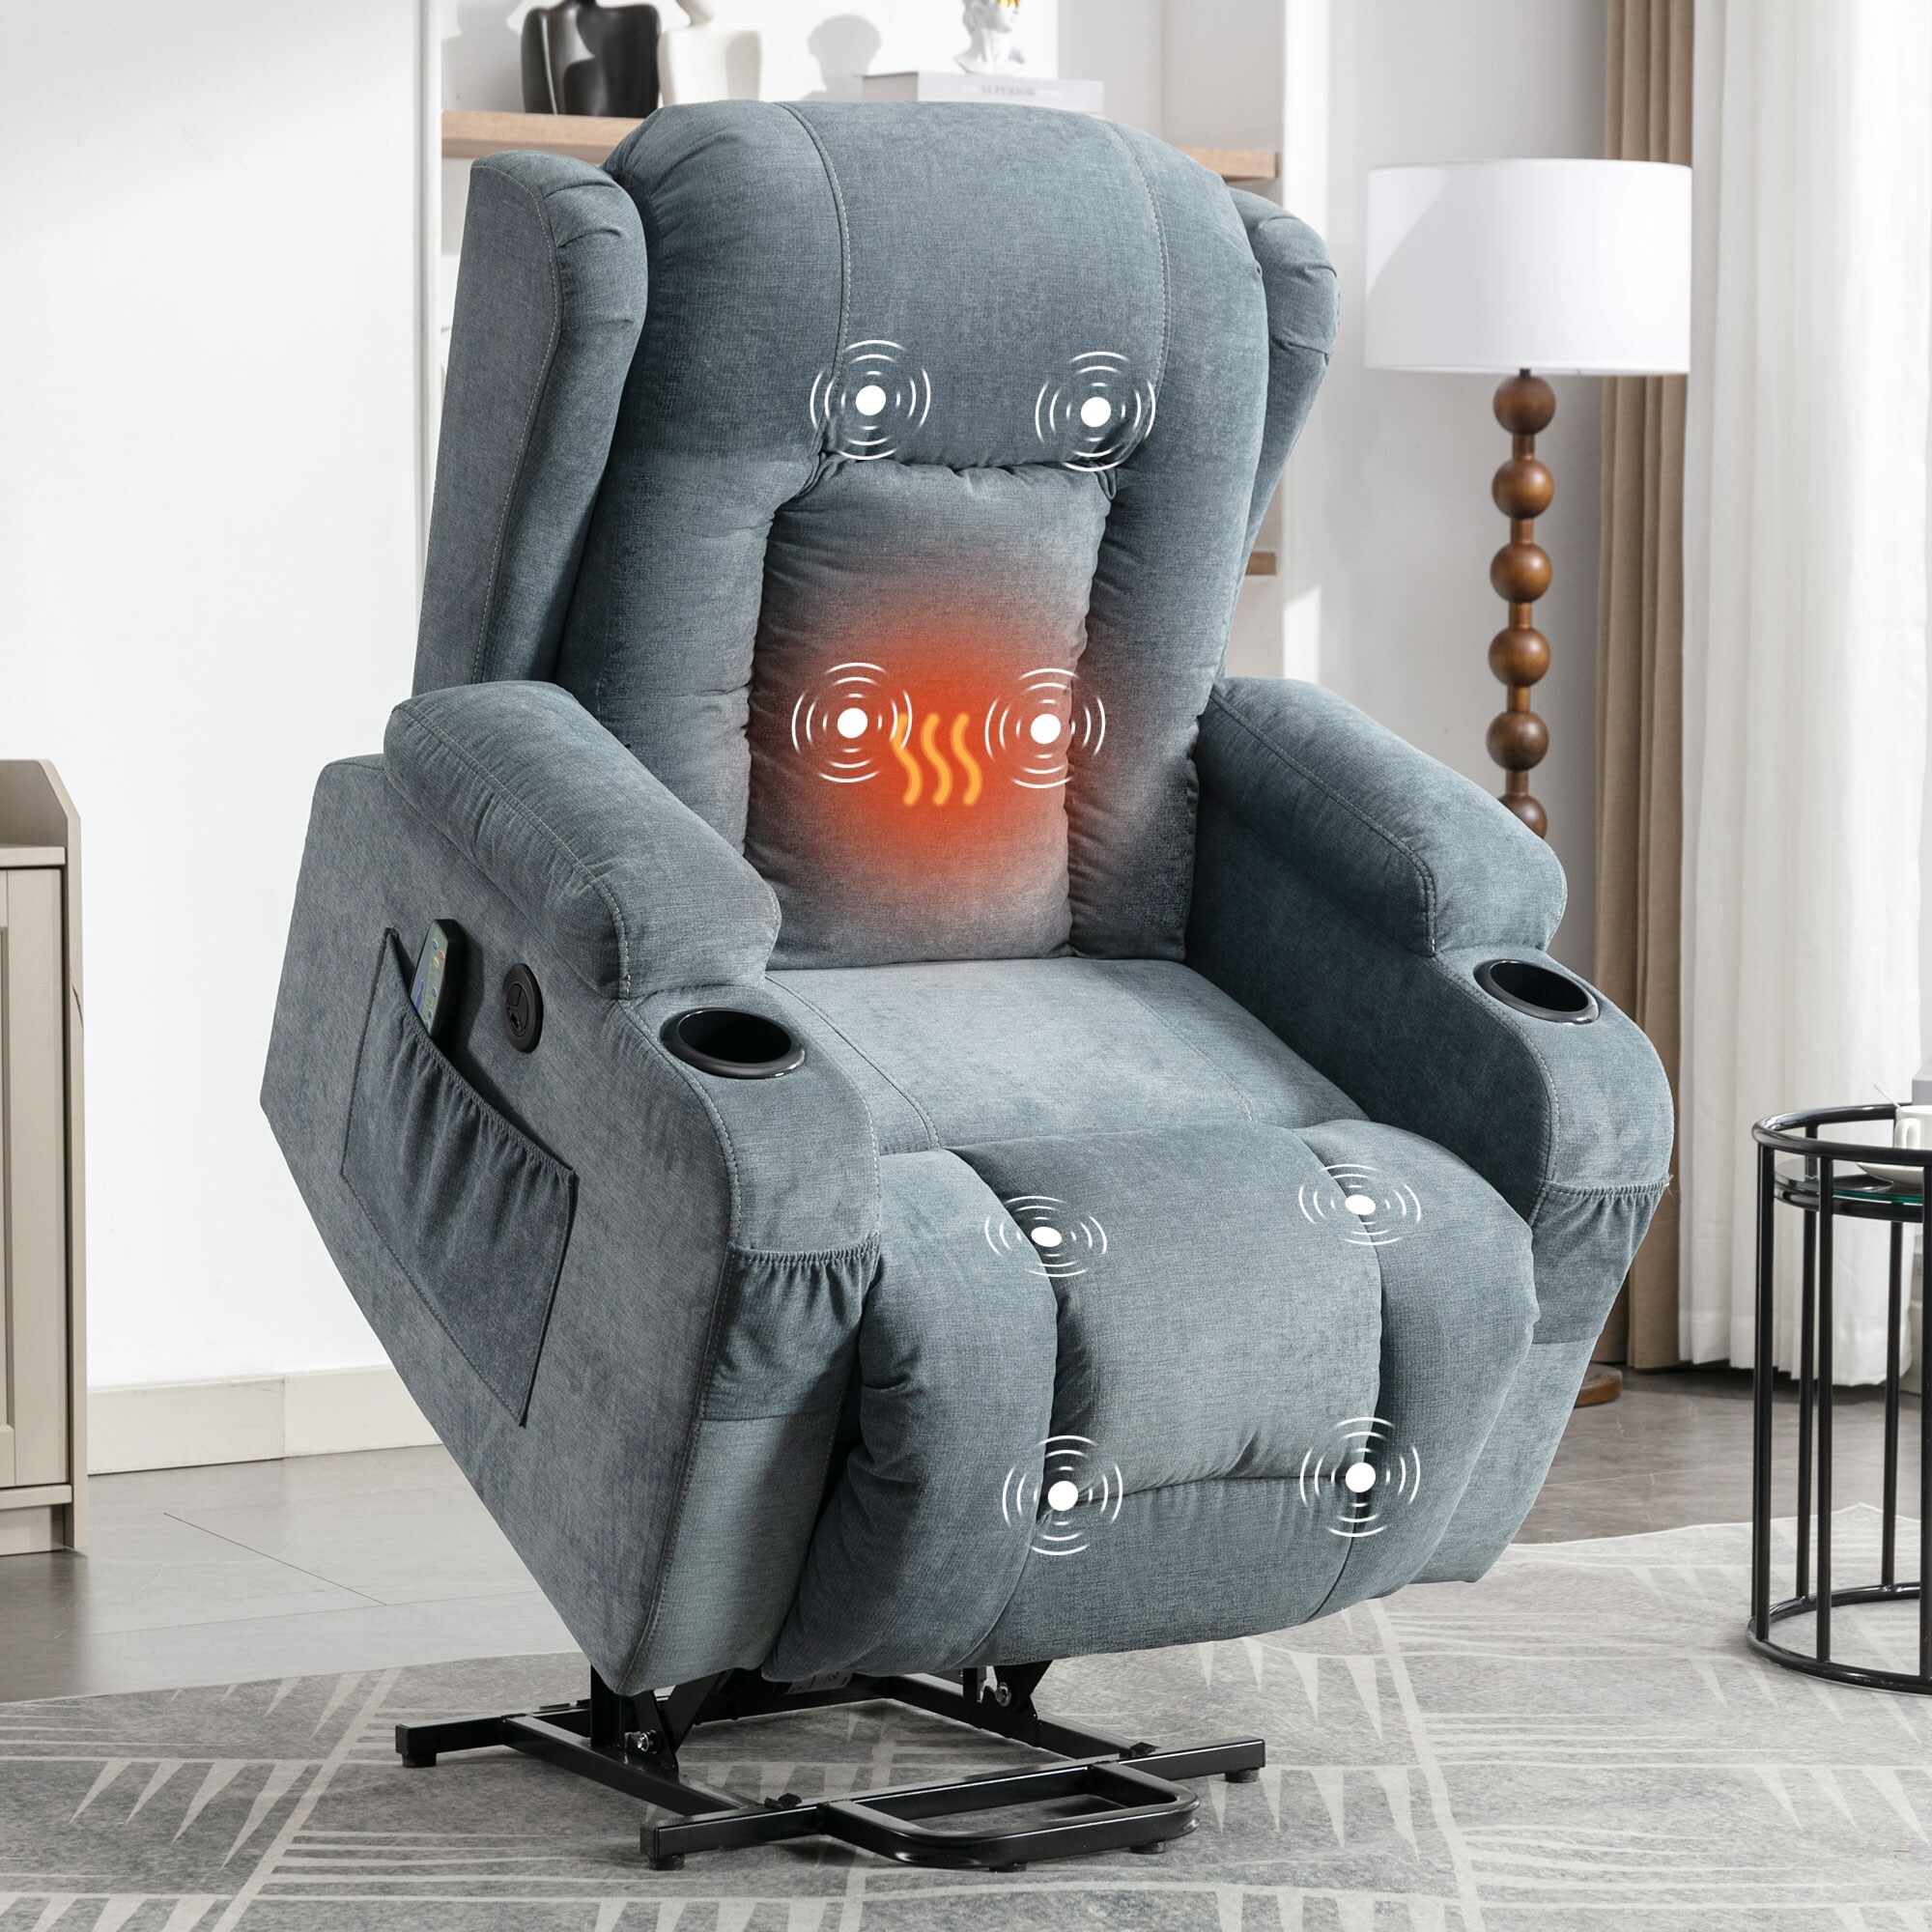 https://ak1.ostkcdn.com/images/products/is/images/direct/4ed5f2740408061c9e29bf816b5e95e1bfbada9b/Power-Lift-Recliner-Chair-for-Elderly-with-Heat-Massage-Recliner-Chair-with-Infinite-Position-%26Side-Pocket%2CUSB-Charge-Port.jpg